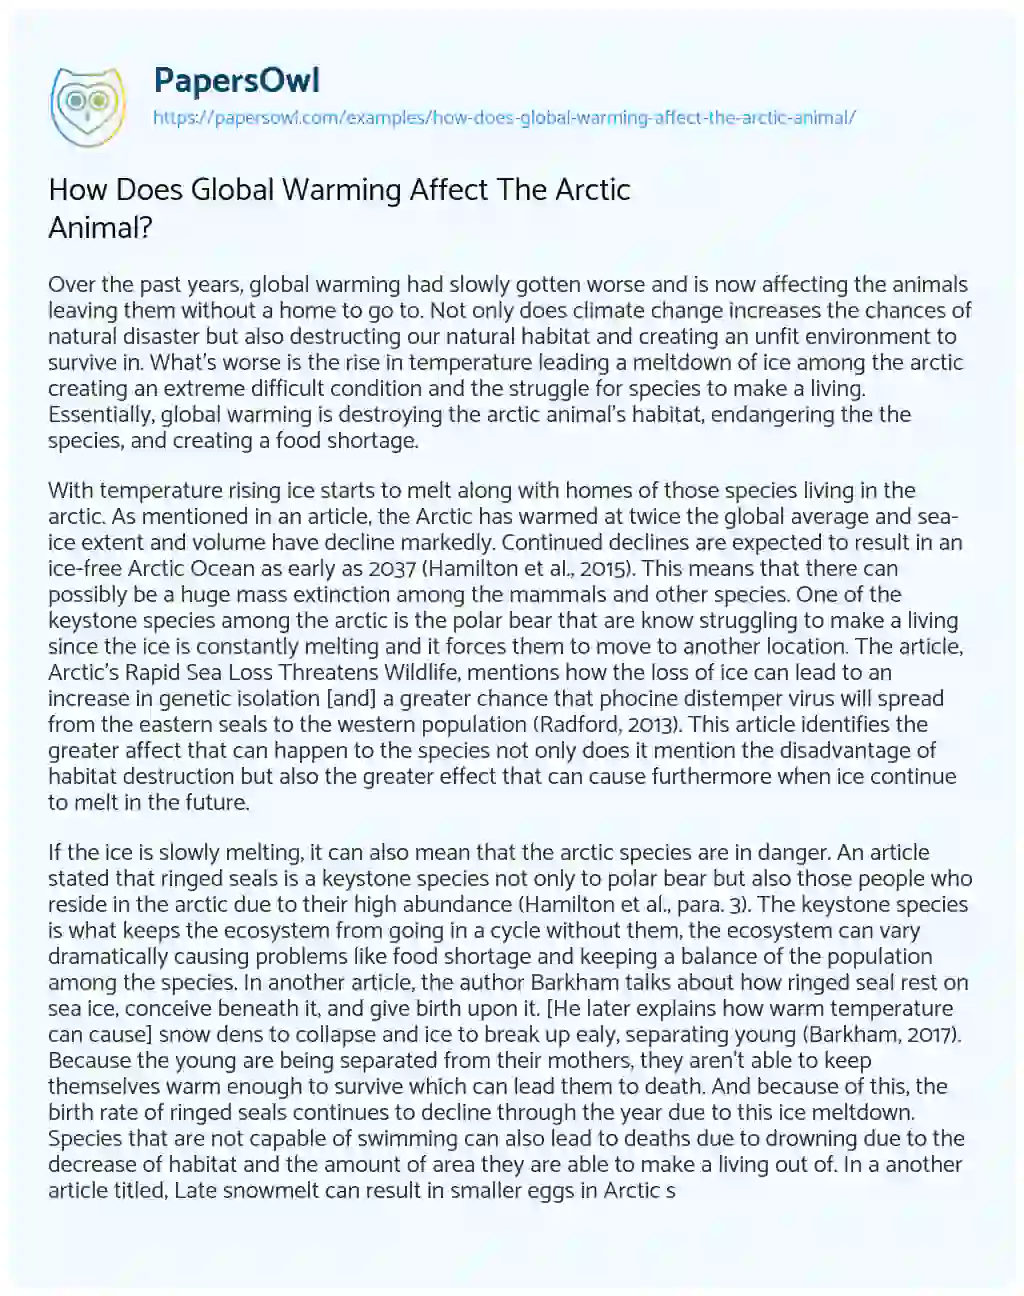 Essay on How does Global Warming Affect the Arctic Animal?